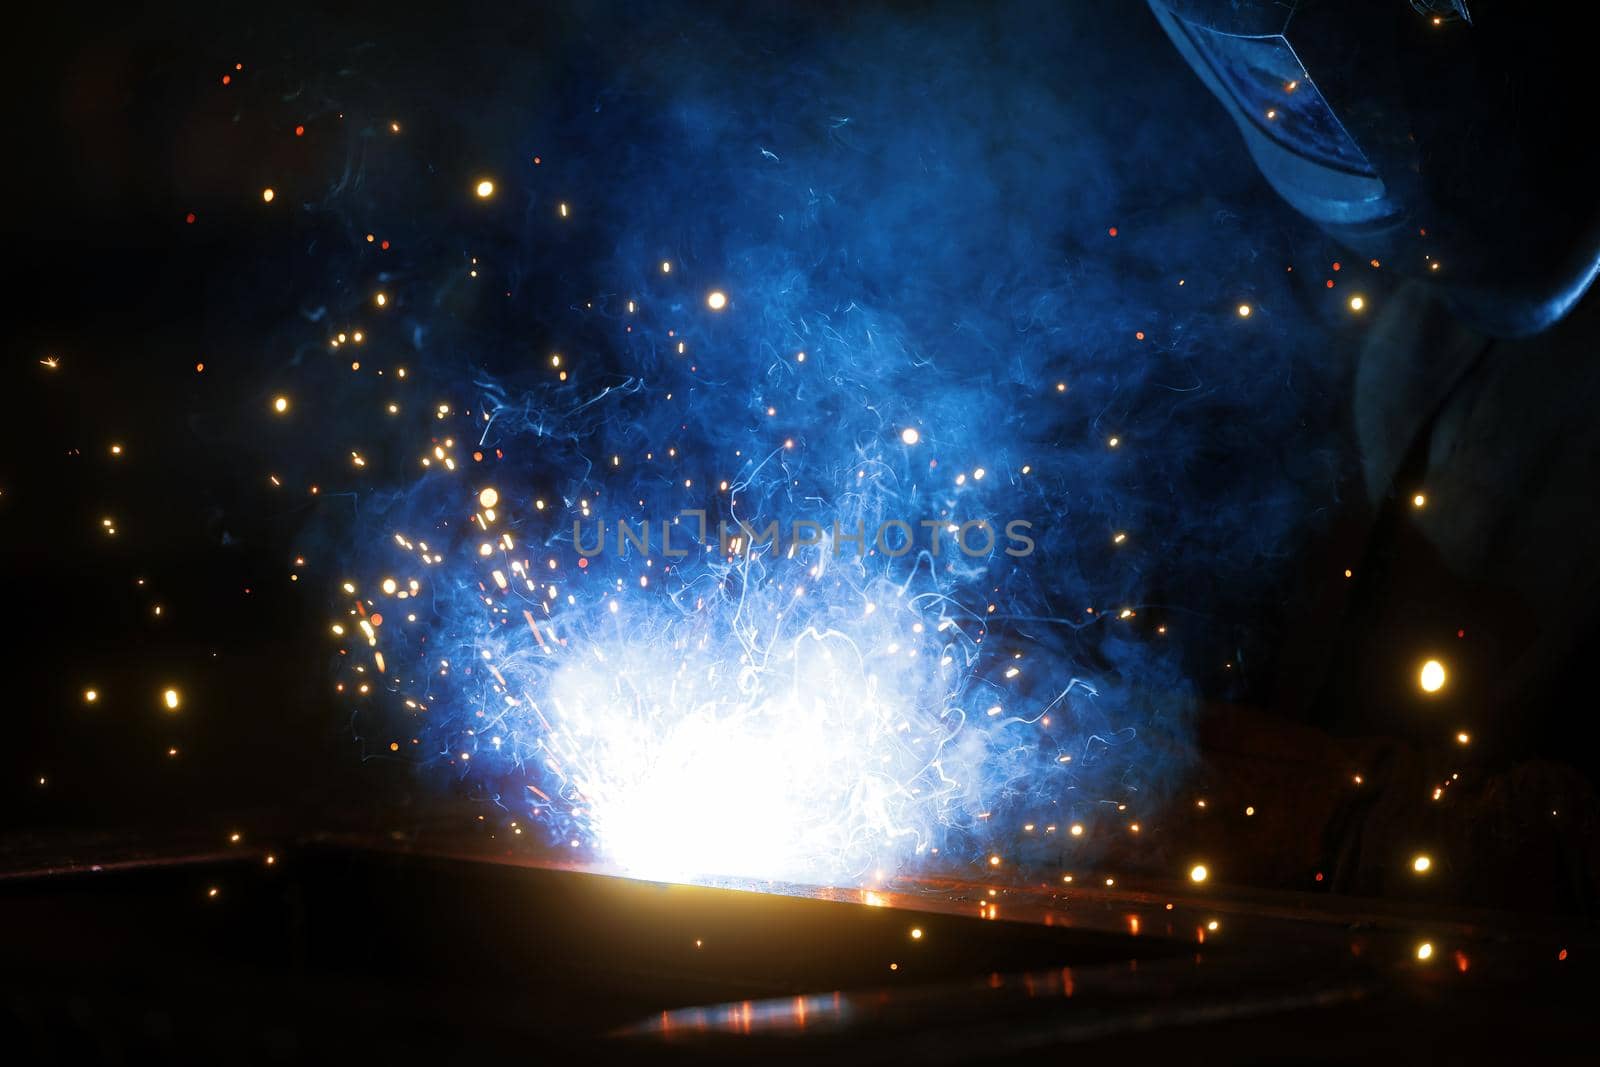 Welder at work. Welding of metal sparks and smoke in the workshop. Industrial Welder With gas Torch in Protective Helmet, welding metal profiles. The welding operation at construction site by EvgeniyQW